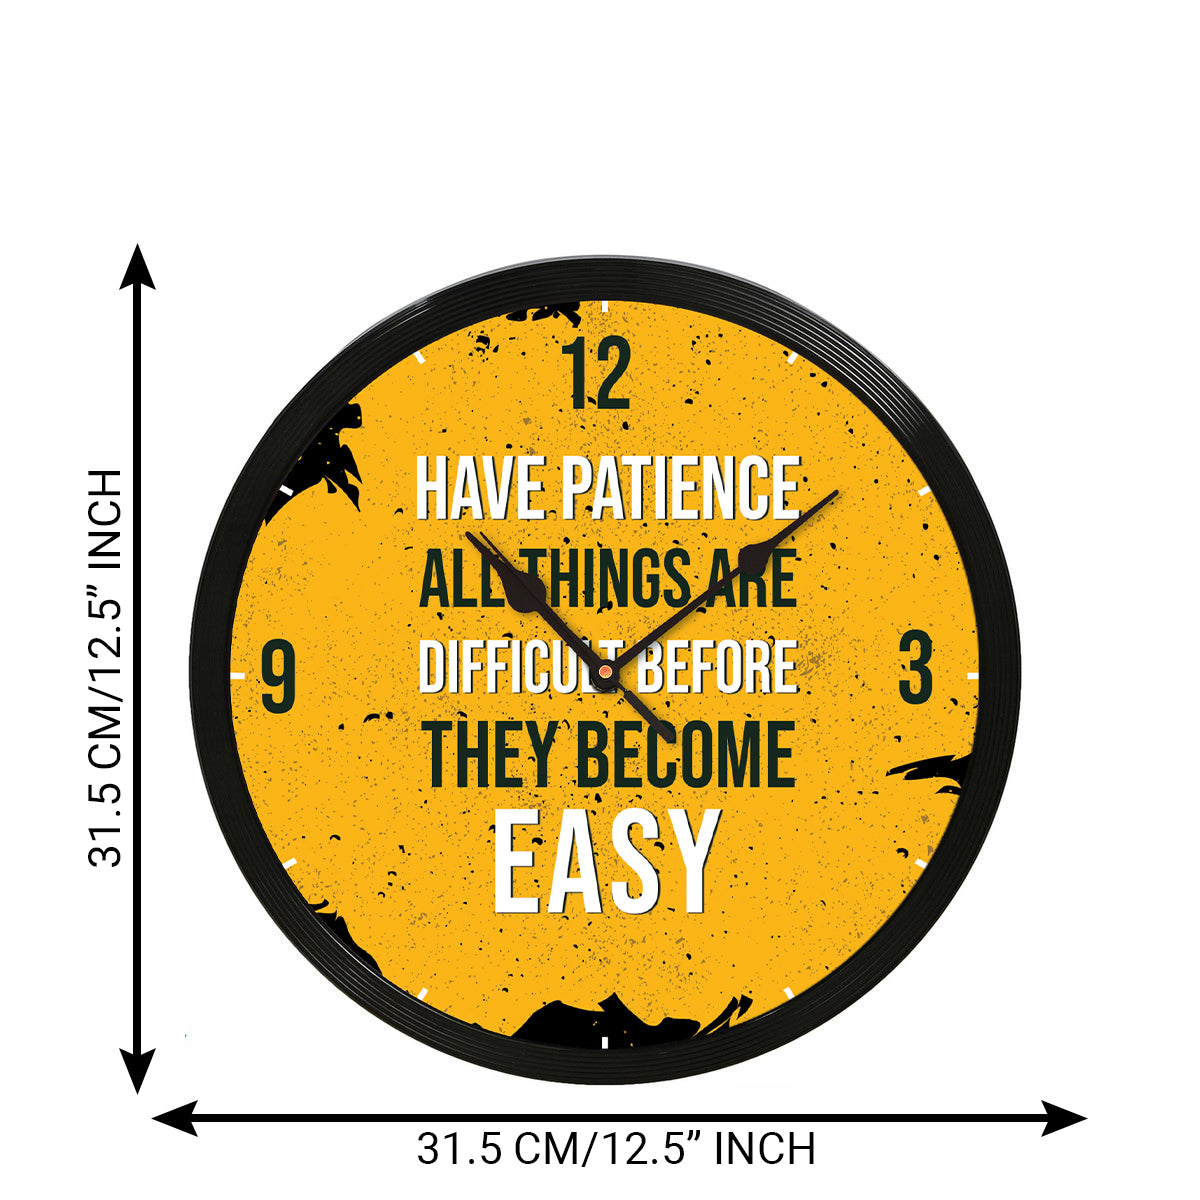 Have Patience All Things Are Difficult Before They Become Easy Quotes Round Designer Wall Clock 3